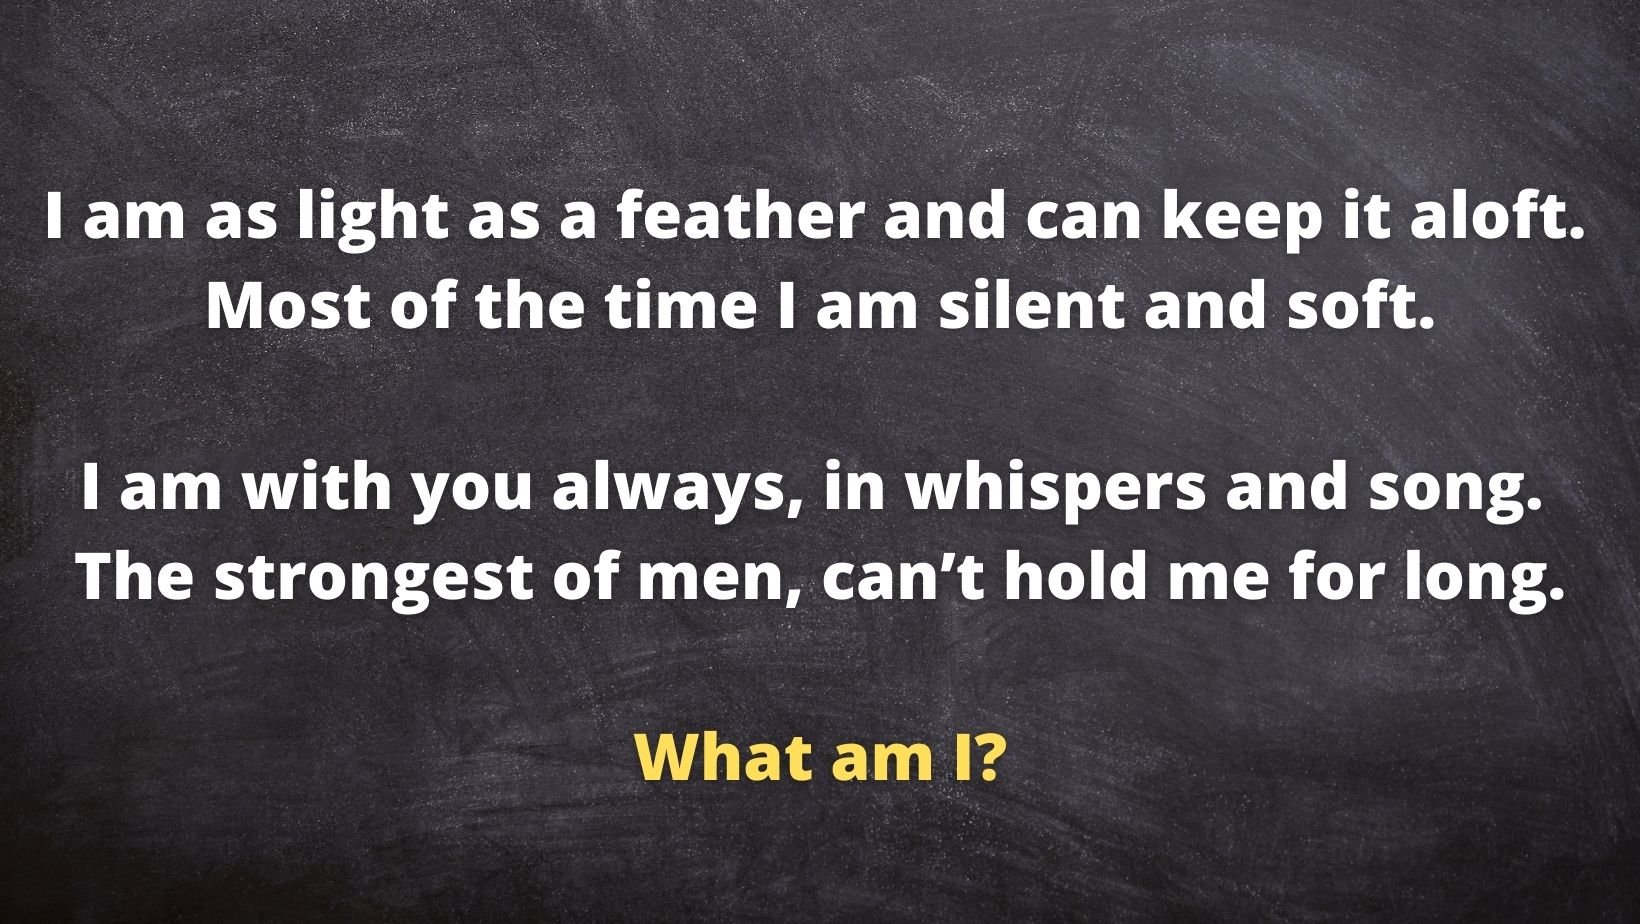 1 34.jpg?resize=1200,630 - This Riddle Is Baffling Everyone! Can You Solve It?